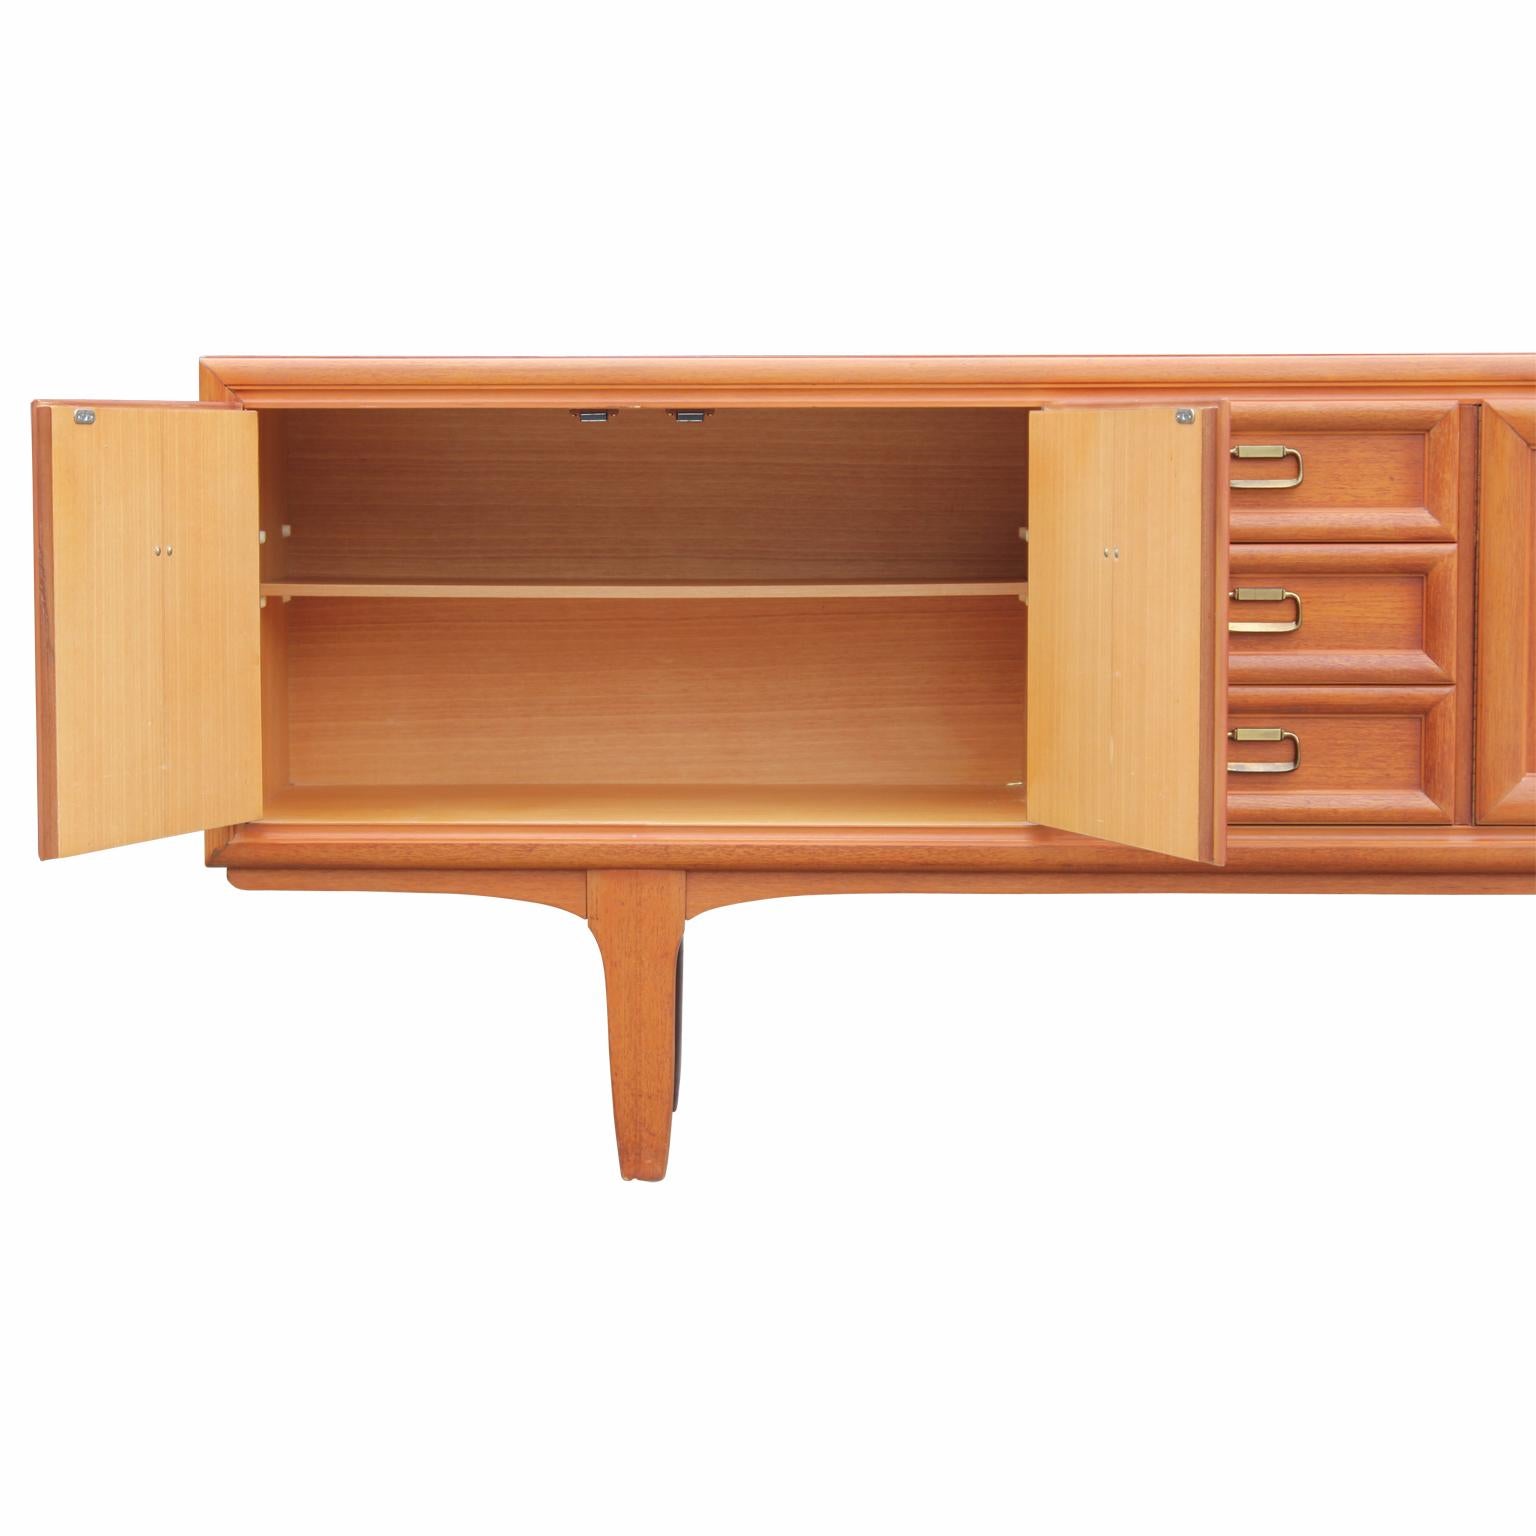 Mid-20th Century Modern Danish Style Teak Sideboard or Credenza with Brass Ring Handles